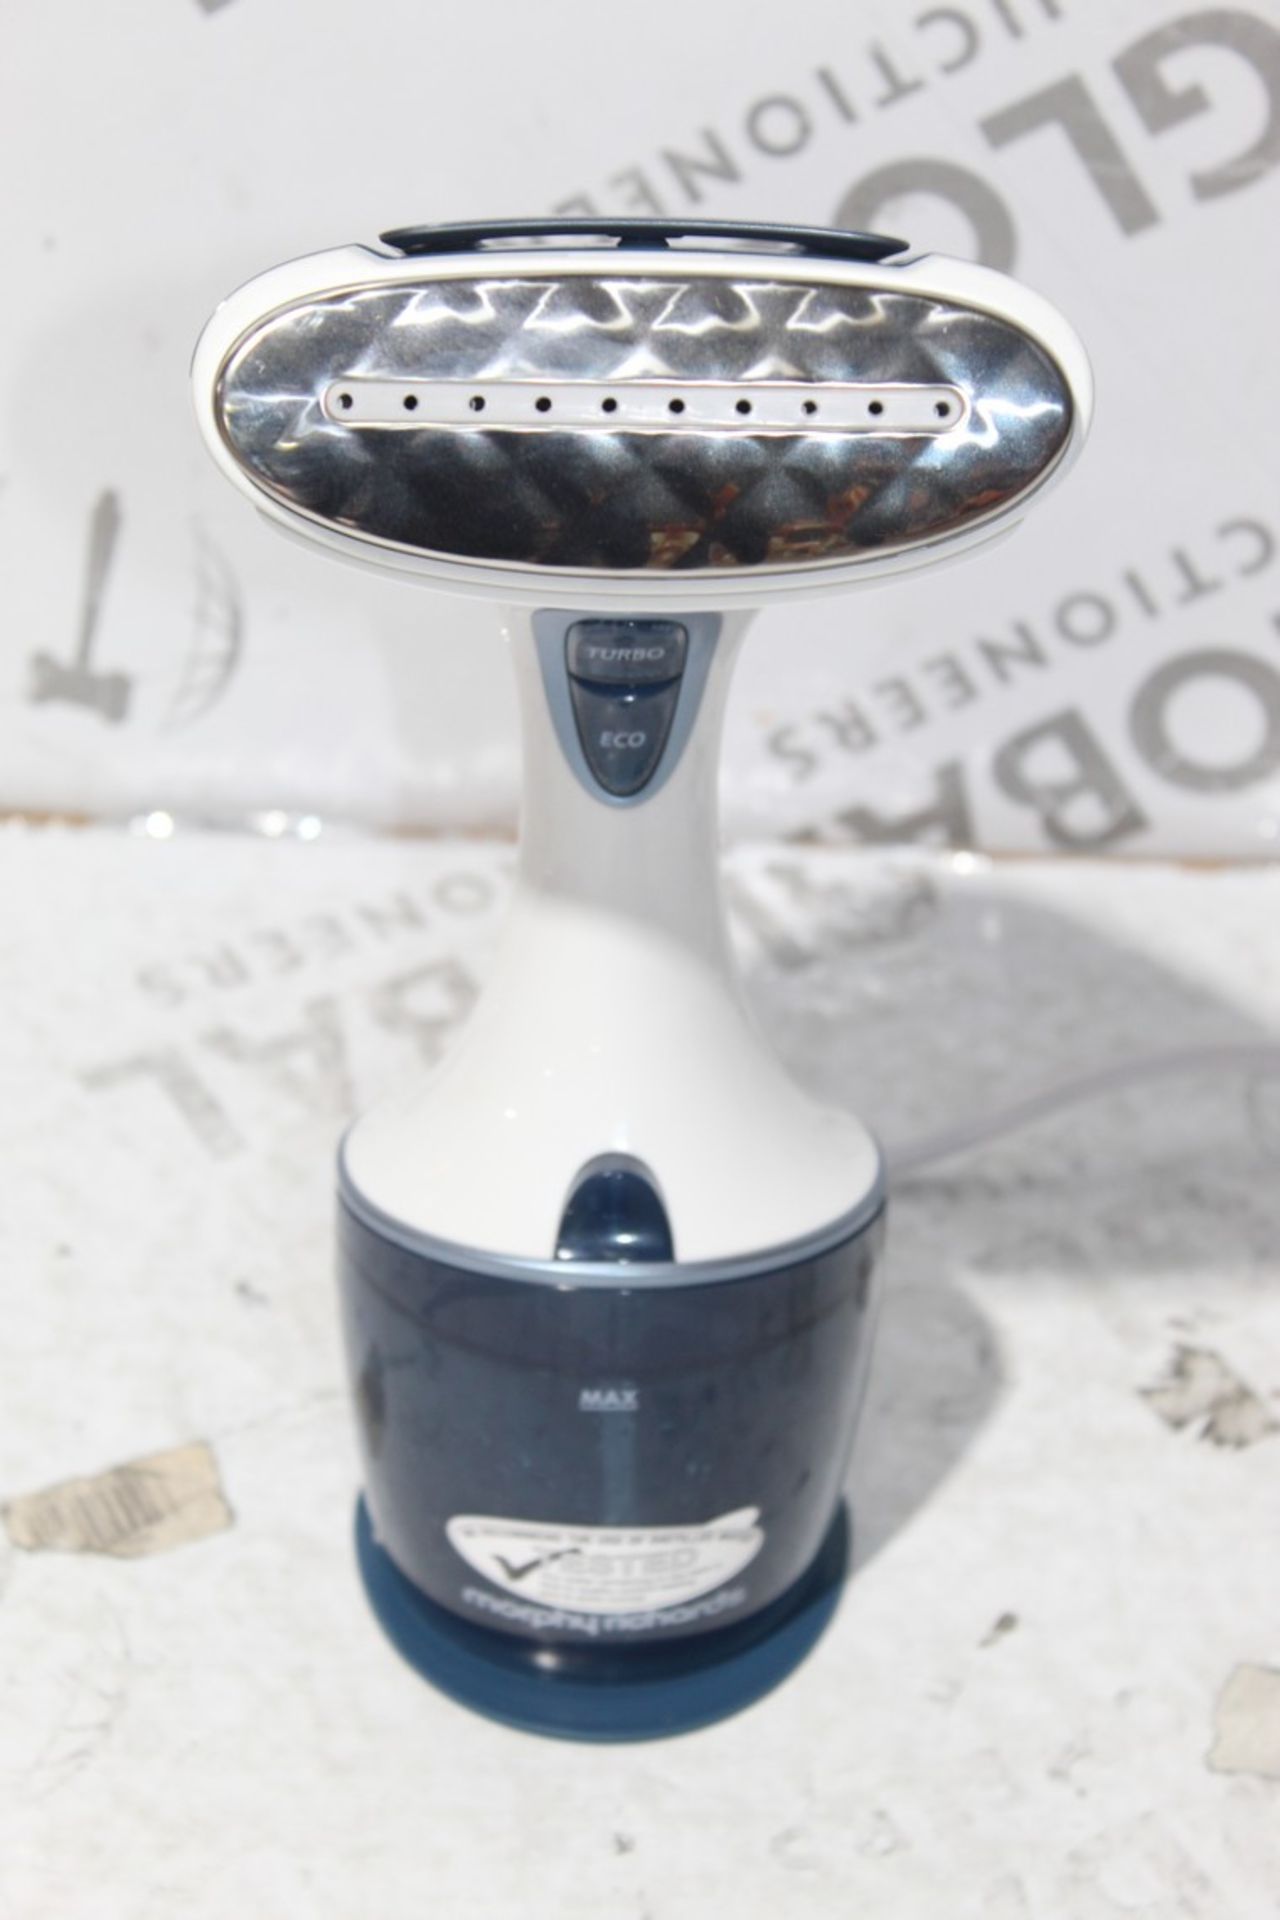 Boxed Morphy Richards Hand Held Garment Steamers R